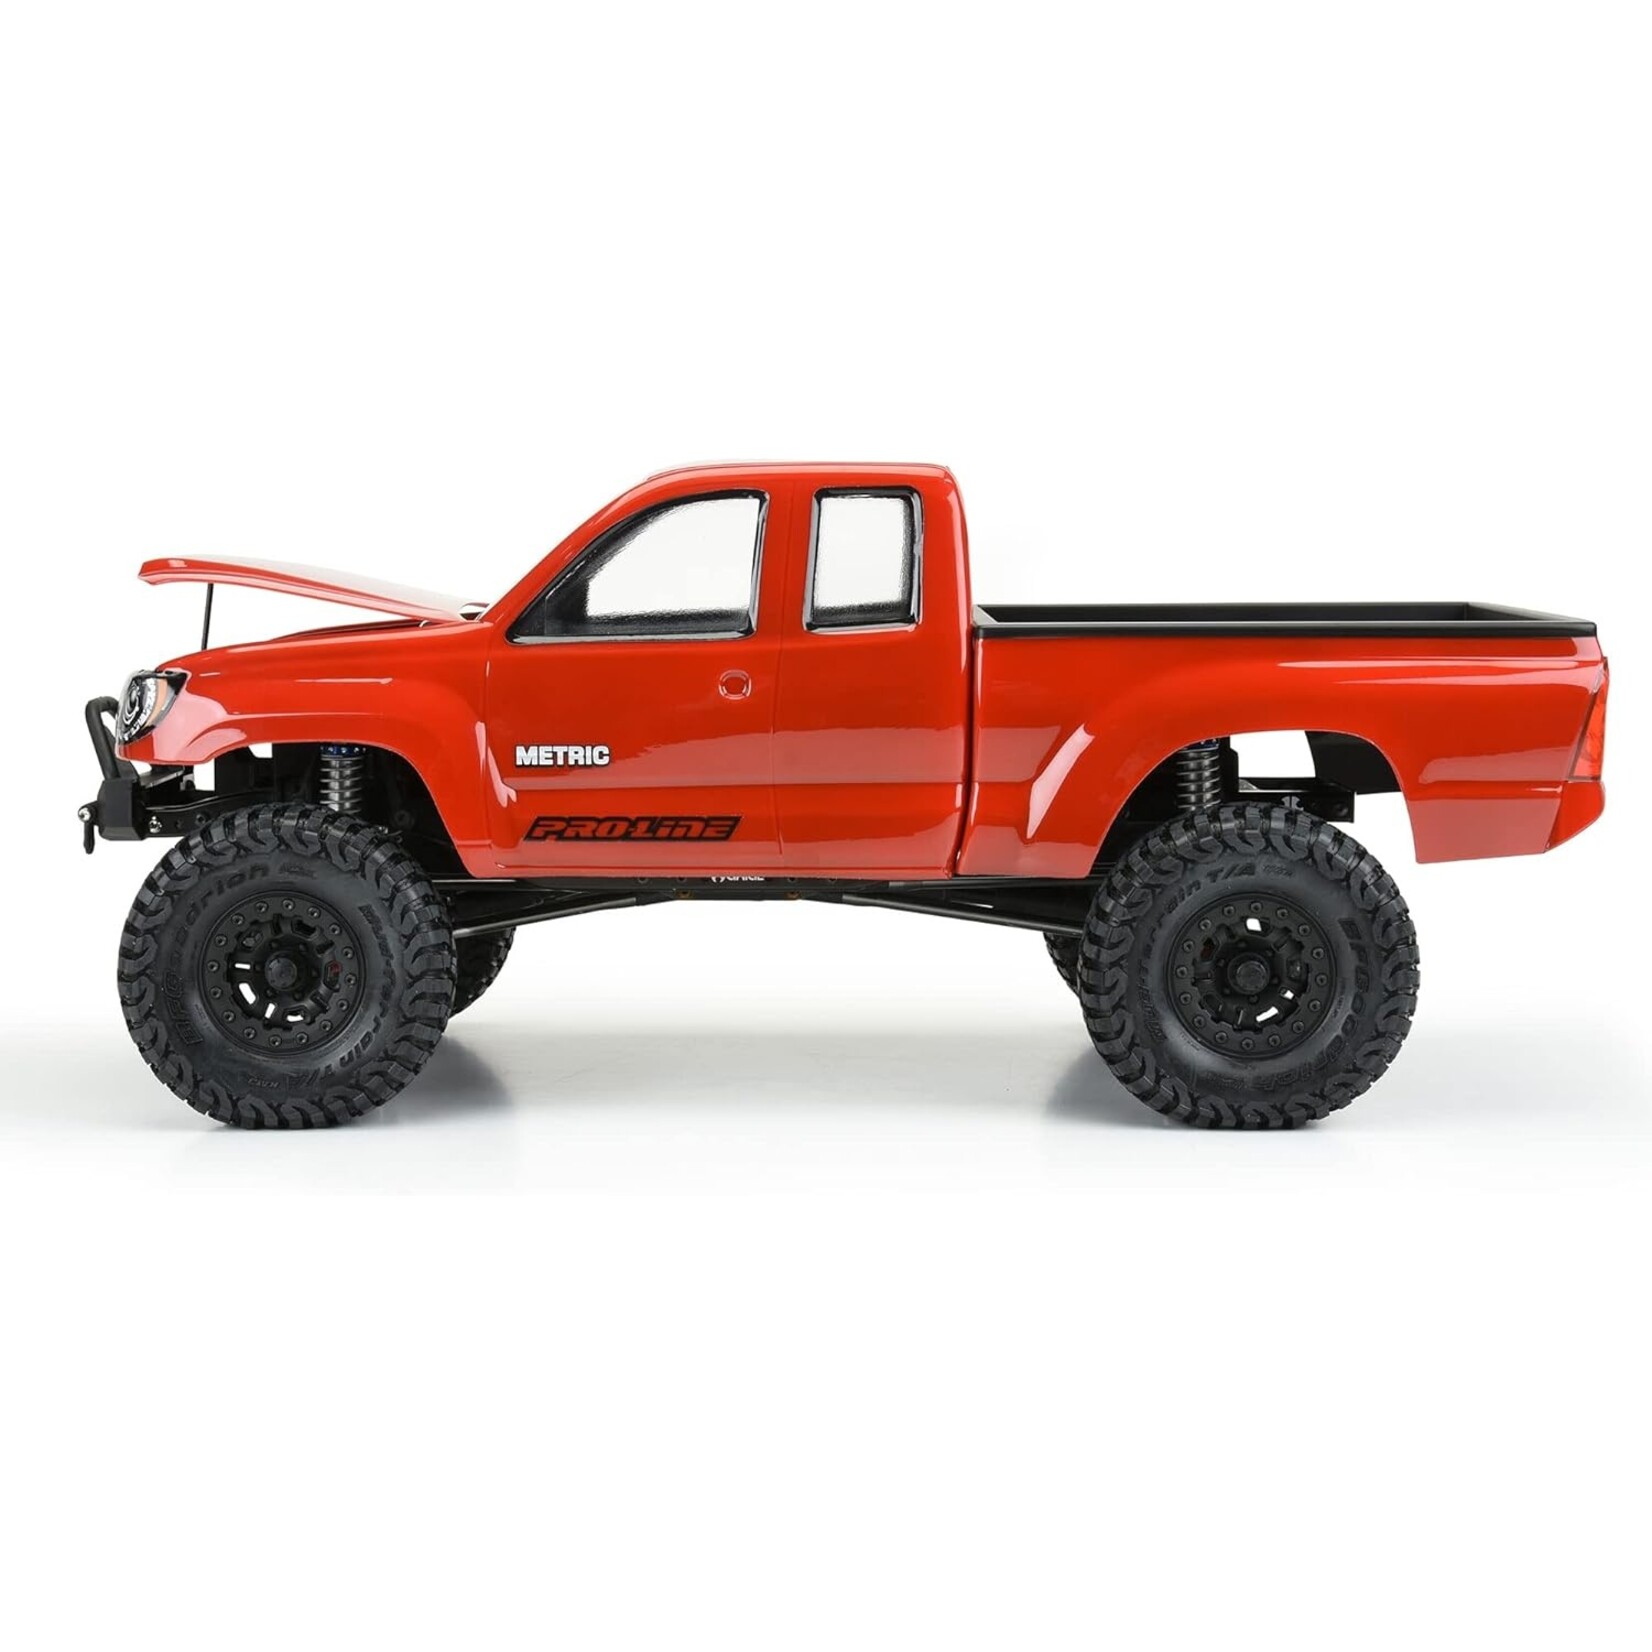 Pro-Line Pro-Line Builder Series: Metric 12.3" Rock Crawler Body (Clear) w/Cab, Bed & Opening Hood #3520-00